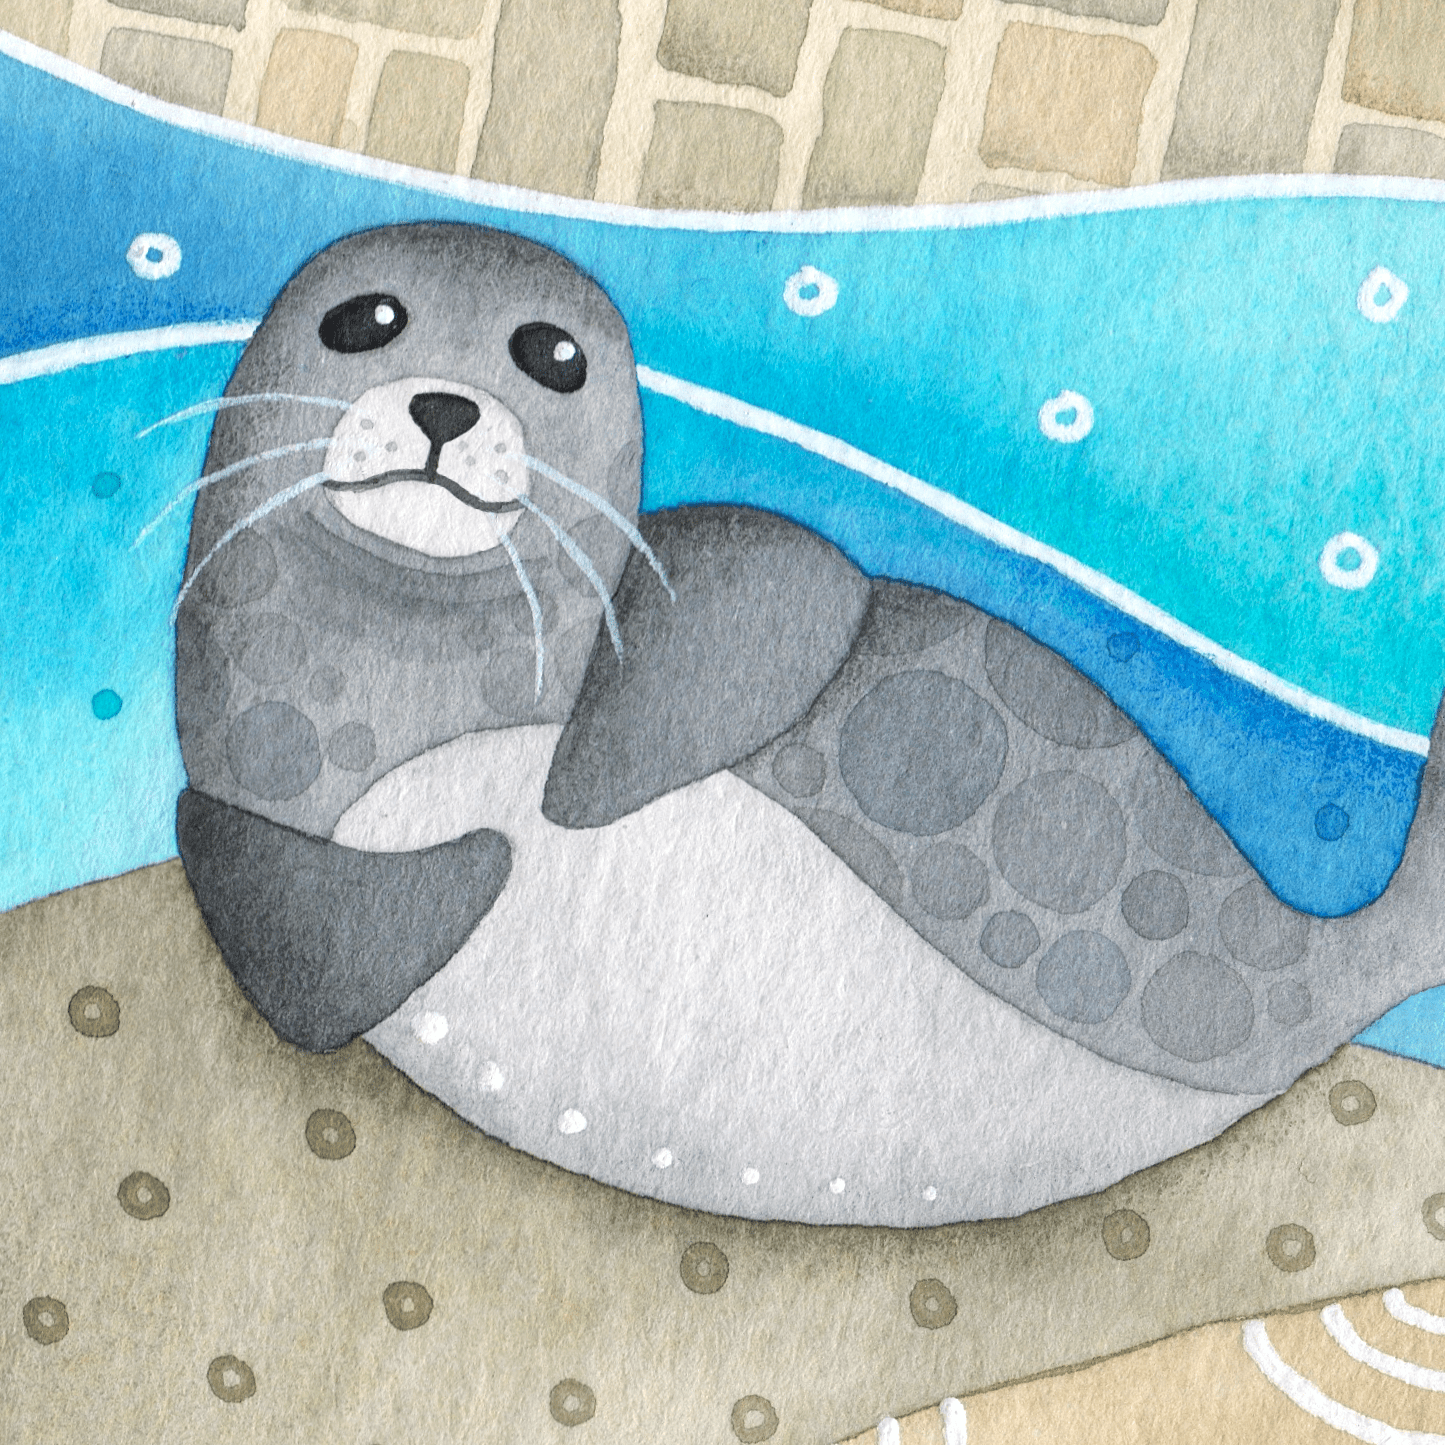 Sammy Seal at Pittenweem Harbour - Seaside Watercolour Painting - Limited Edition Signed Print - East Neuk Beach Crafts